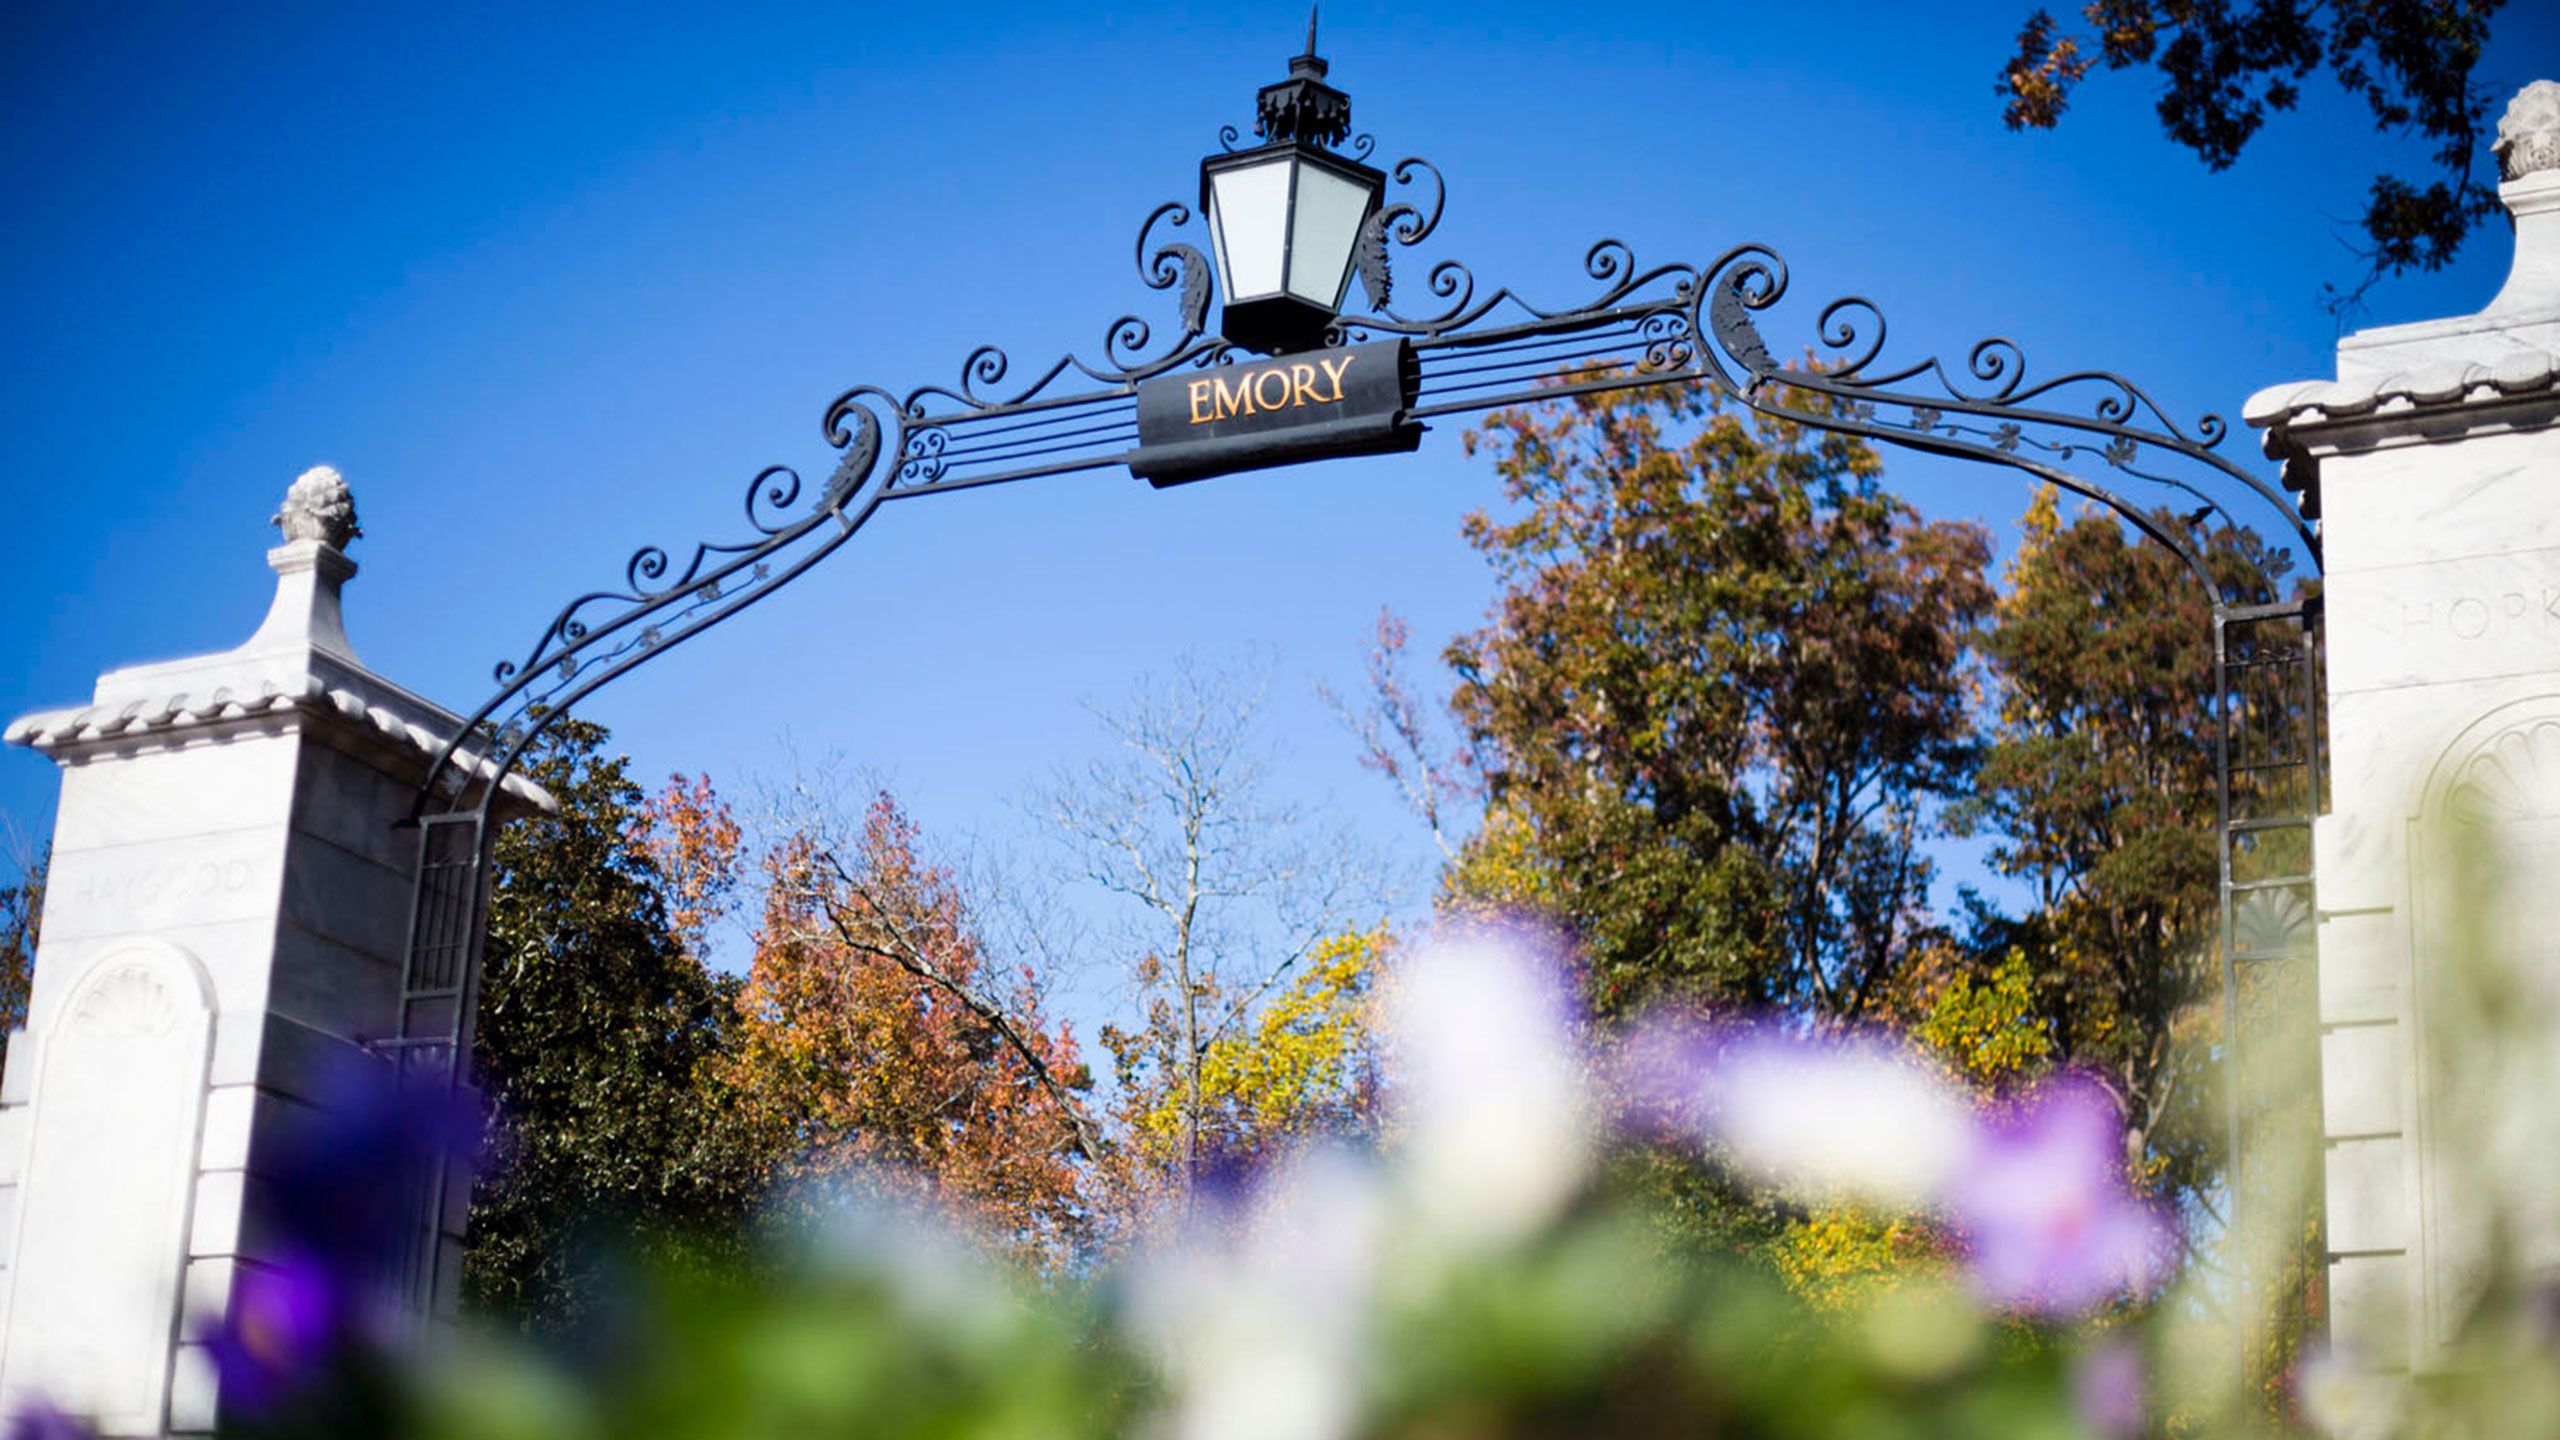 The Emory gate is surrounded by flowers with blue sky in the background